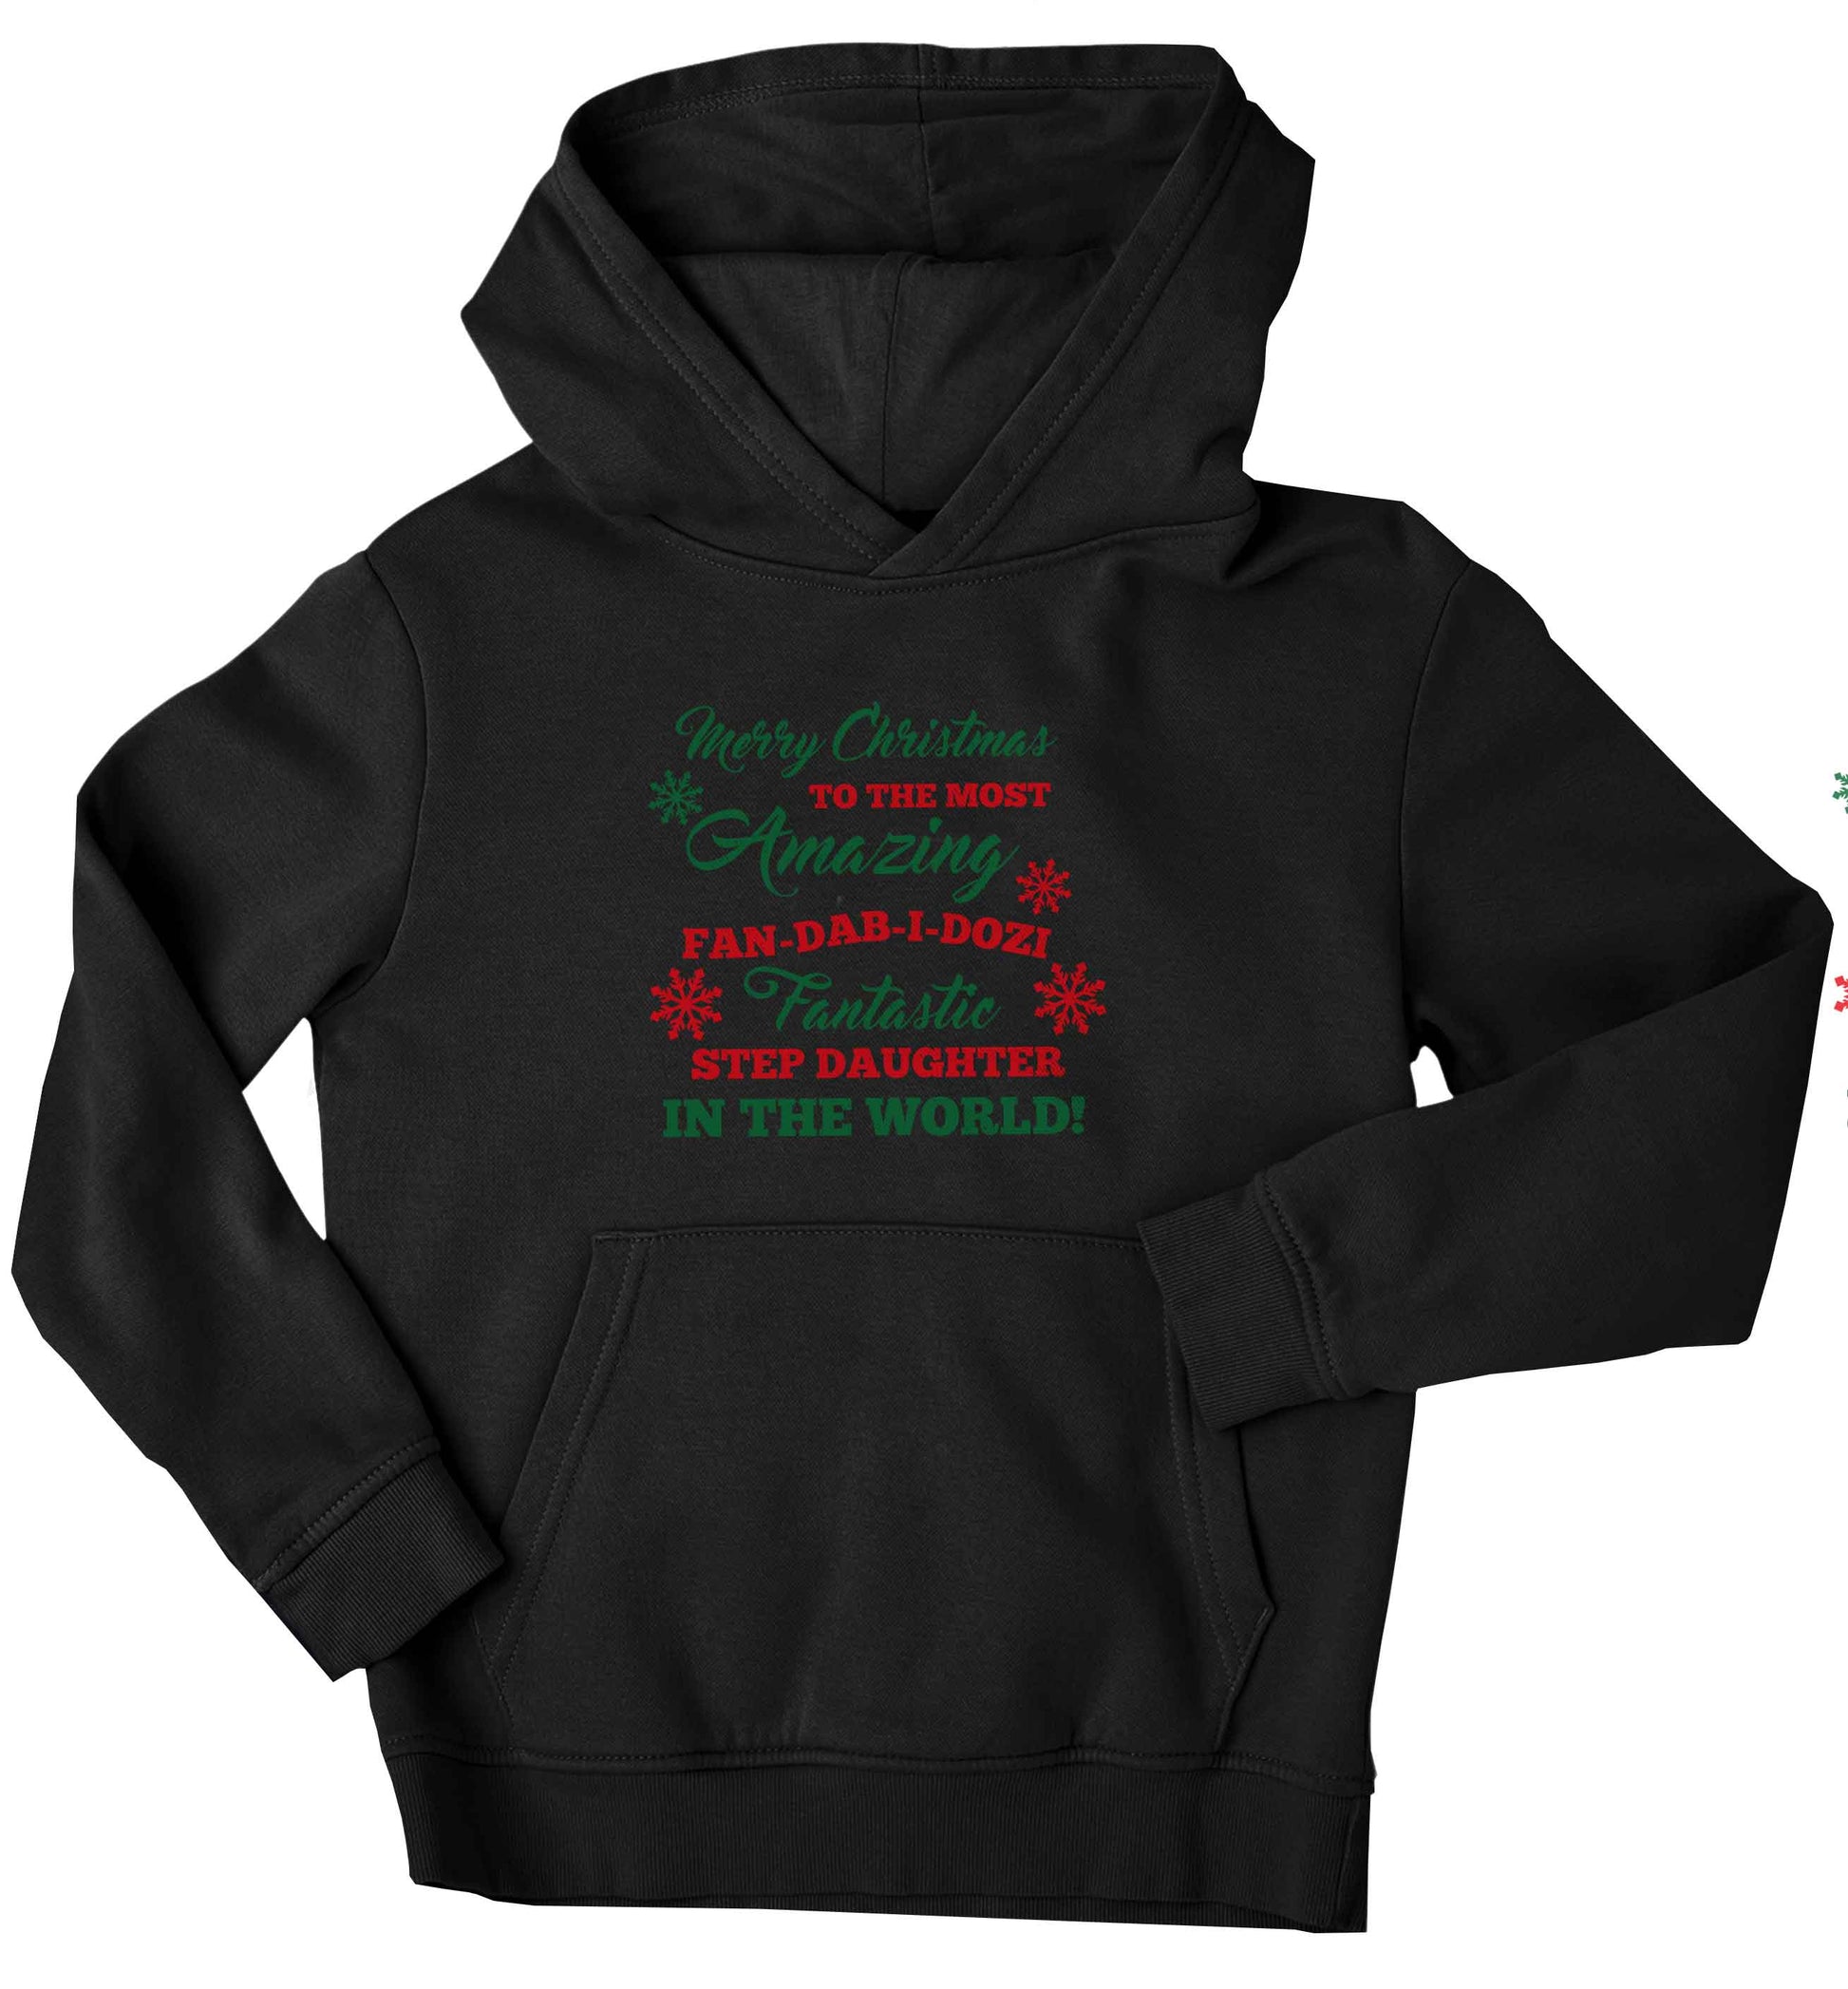 Merry Christmas to the most amazing fan-dab-i-dozi fantasic Step Daughter in the world children's black hoodie 12-13 Years